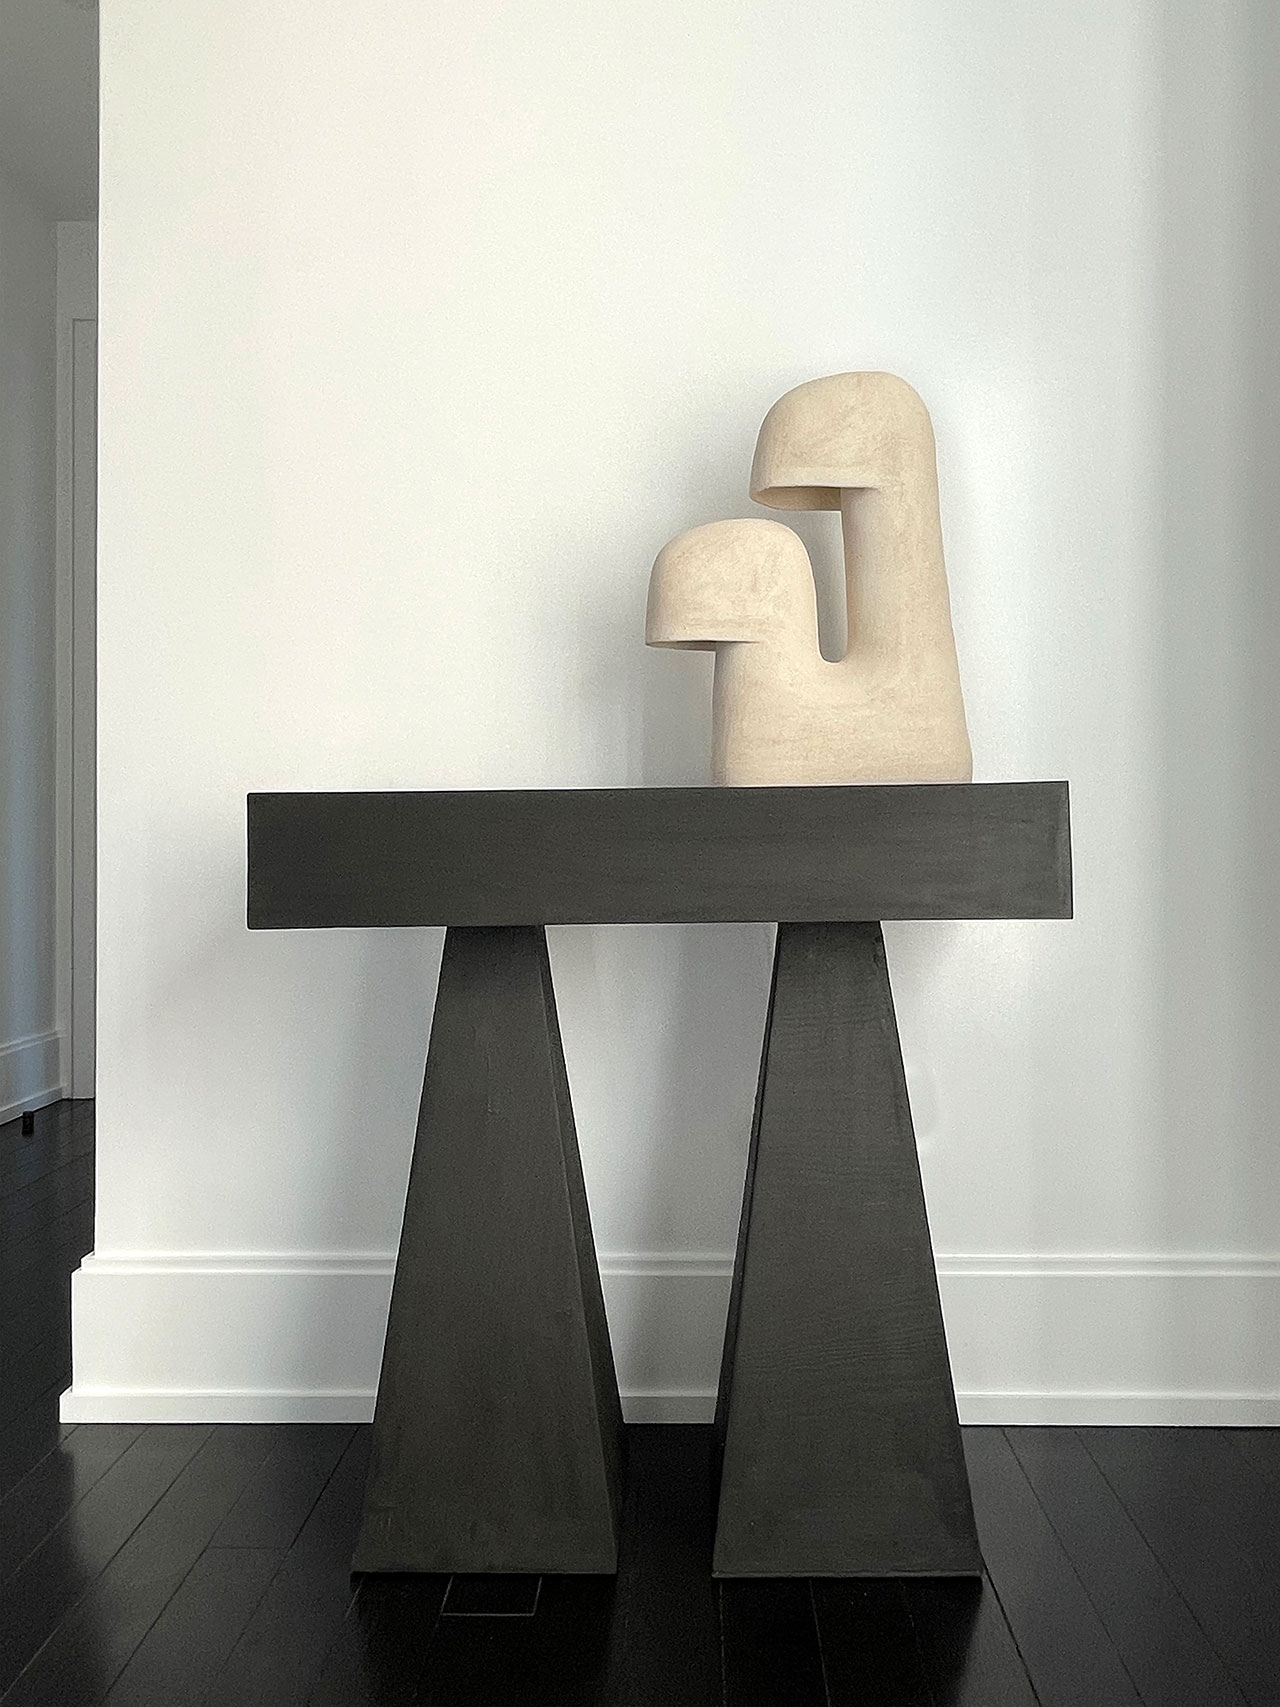 Galerie Philia at Walker Tower, Chelsea, New York. Courtesy of Galerie Philia.
Featured:
Elisa Uberti, Édifice table lamp, 2020. White stoneware. 53 x 39 x 15 cm.
Lucas Morten, Torn, High Console Table, 2020. Wood. 90.5 x 40 x 89 cm.